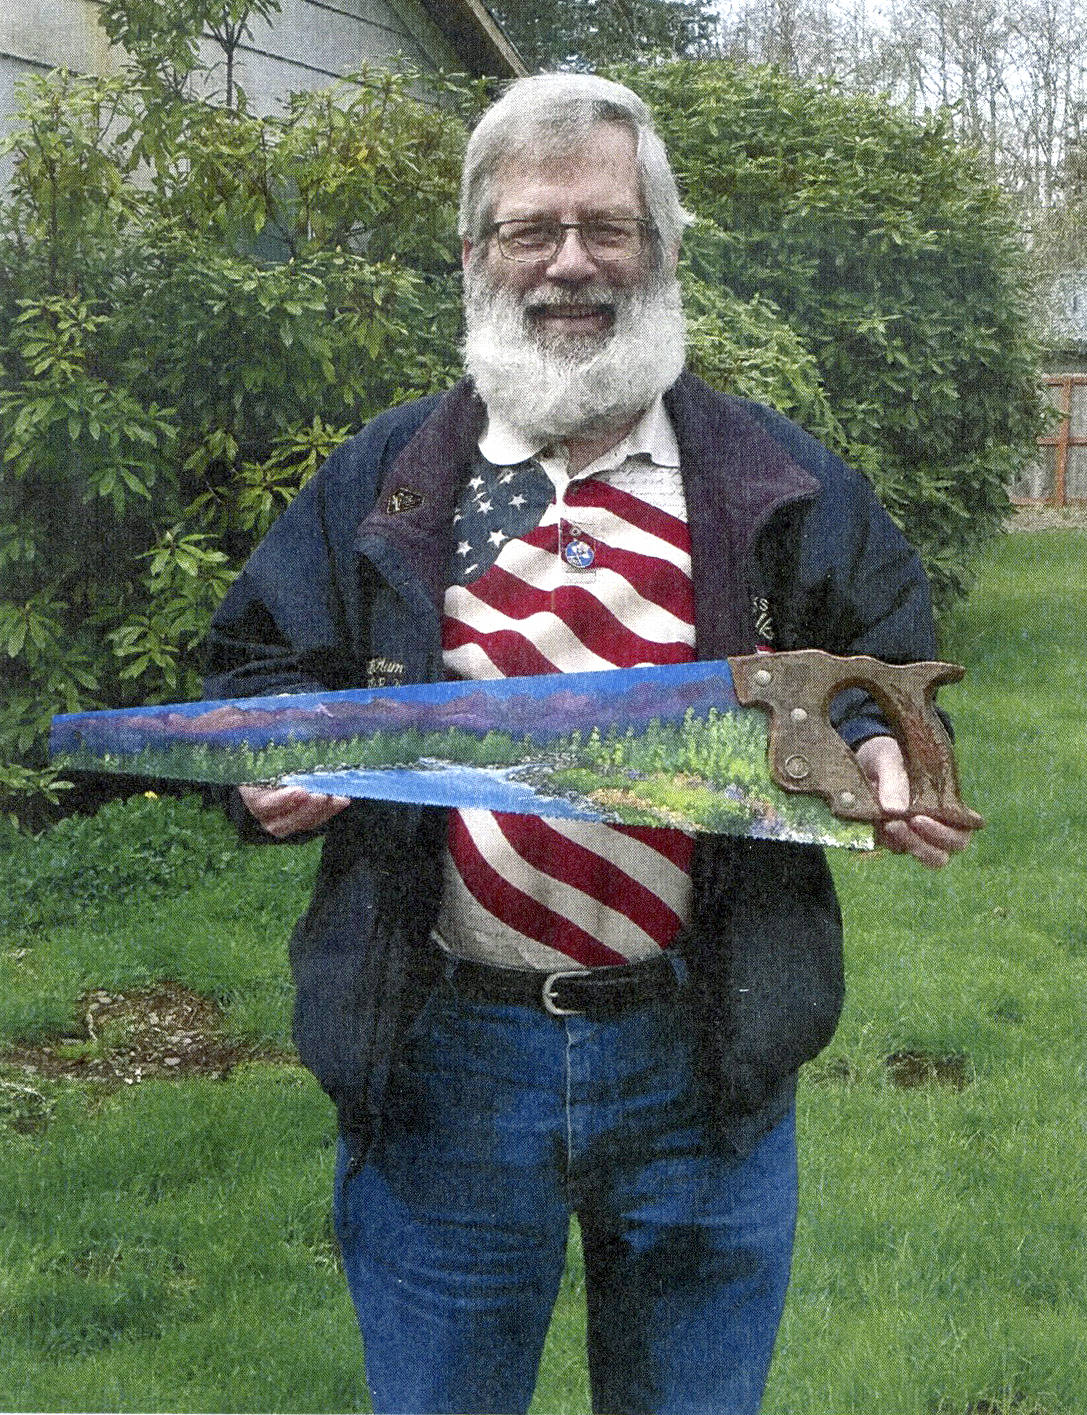 Gold Star Families Memorial board member Bill Plumley has donated a hand painted saw to be raffled with funds raised to benefit the monument project. Tickets are $1 and the drawing will be held after the monument’s groundbreaking ceremony at the Forks Transit Center scheduled for June 29, 2019. The Northwest Navy Band will be on hand for that ceremony. Submitted photo